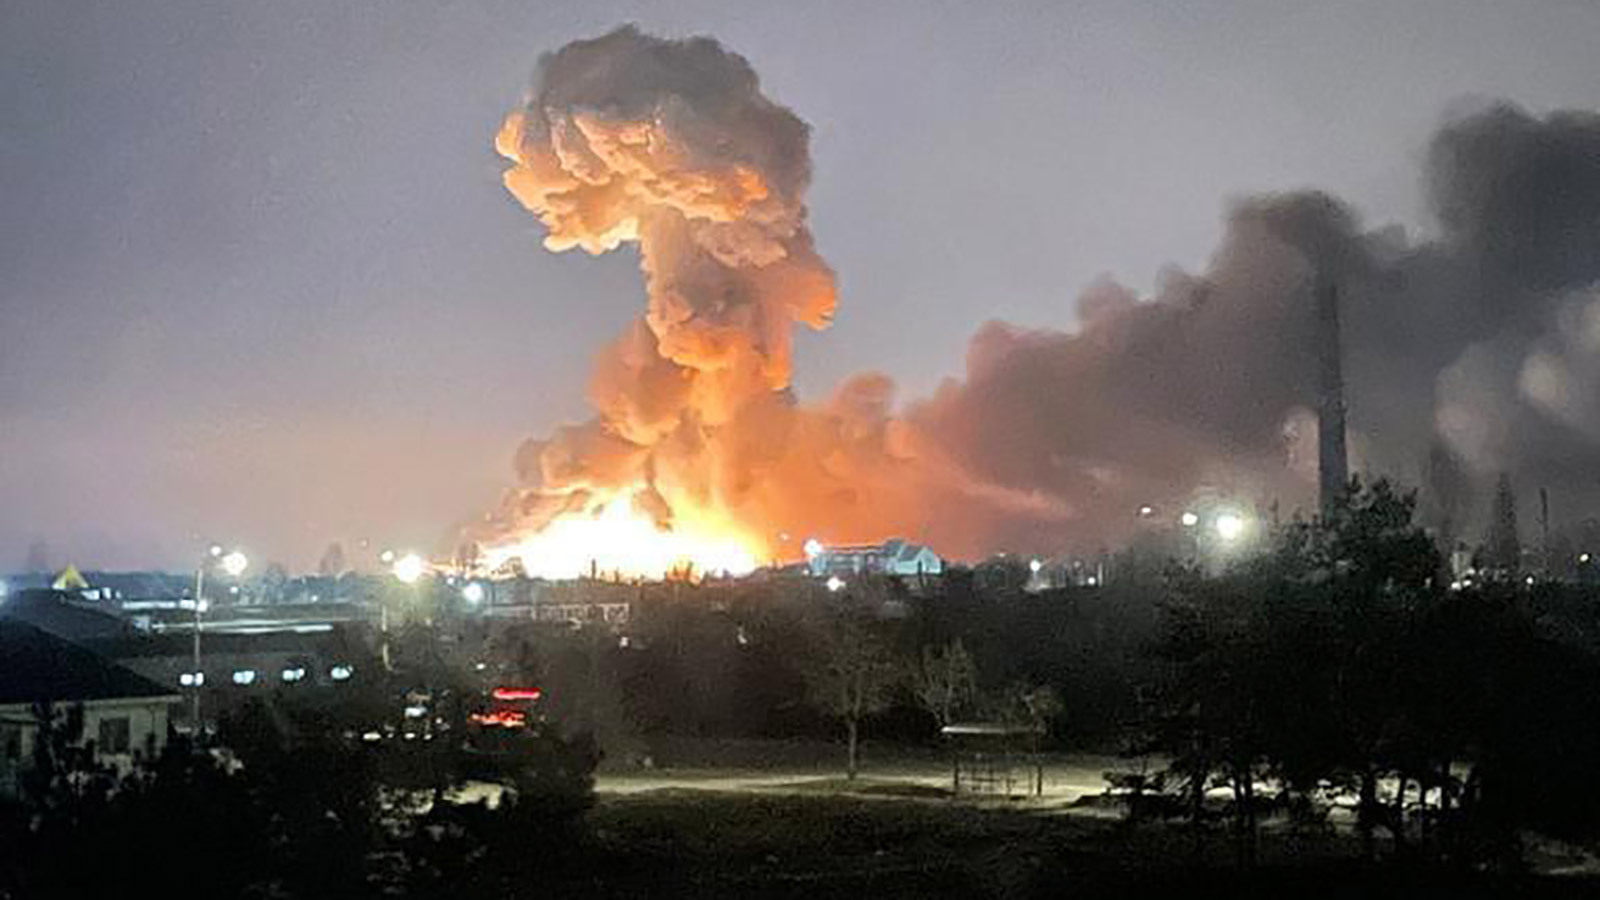 An image sent by the Ukraine President’s Office to CNN appearing to show an explosion in the capital Kiev.